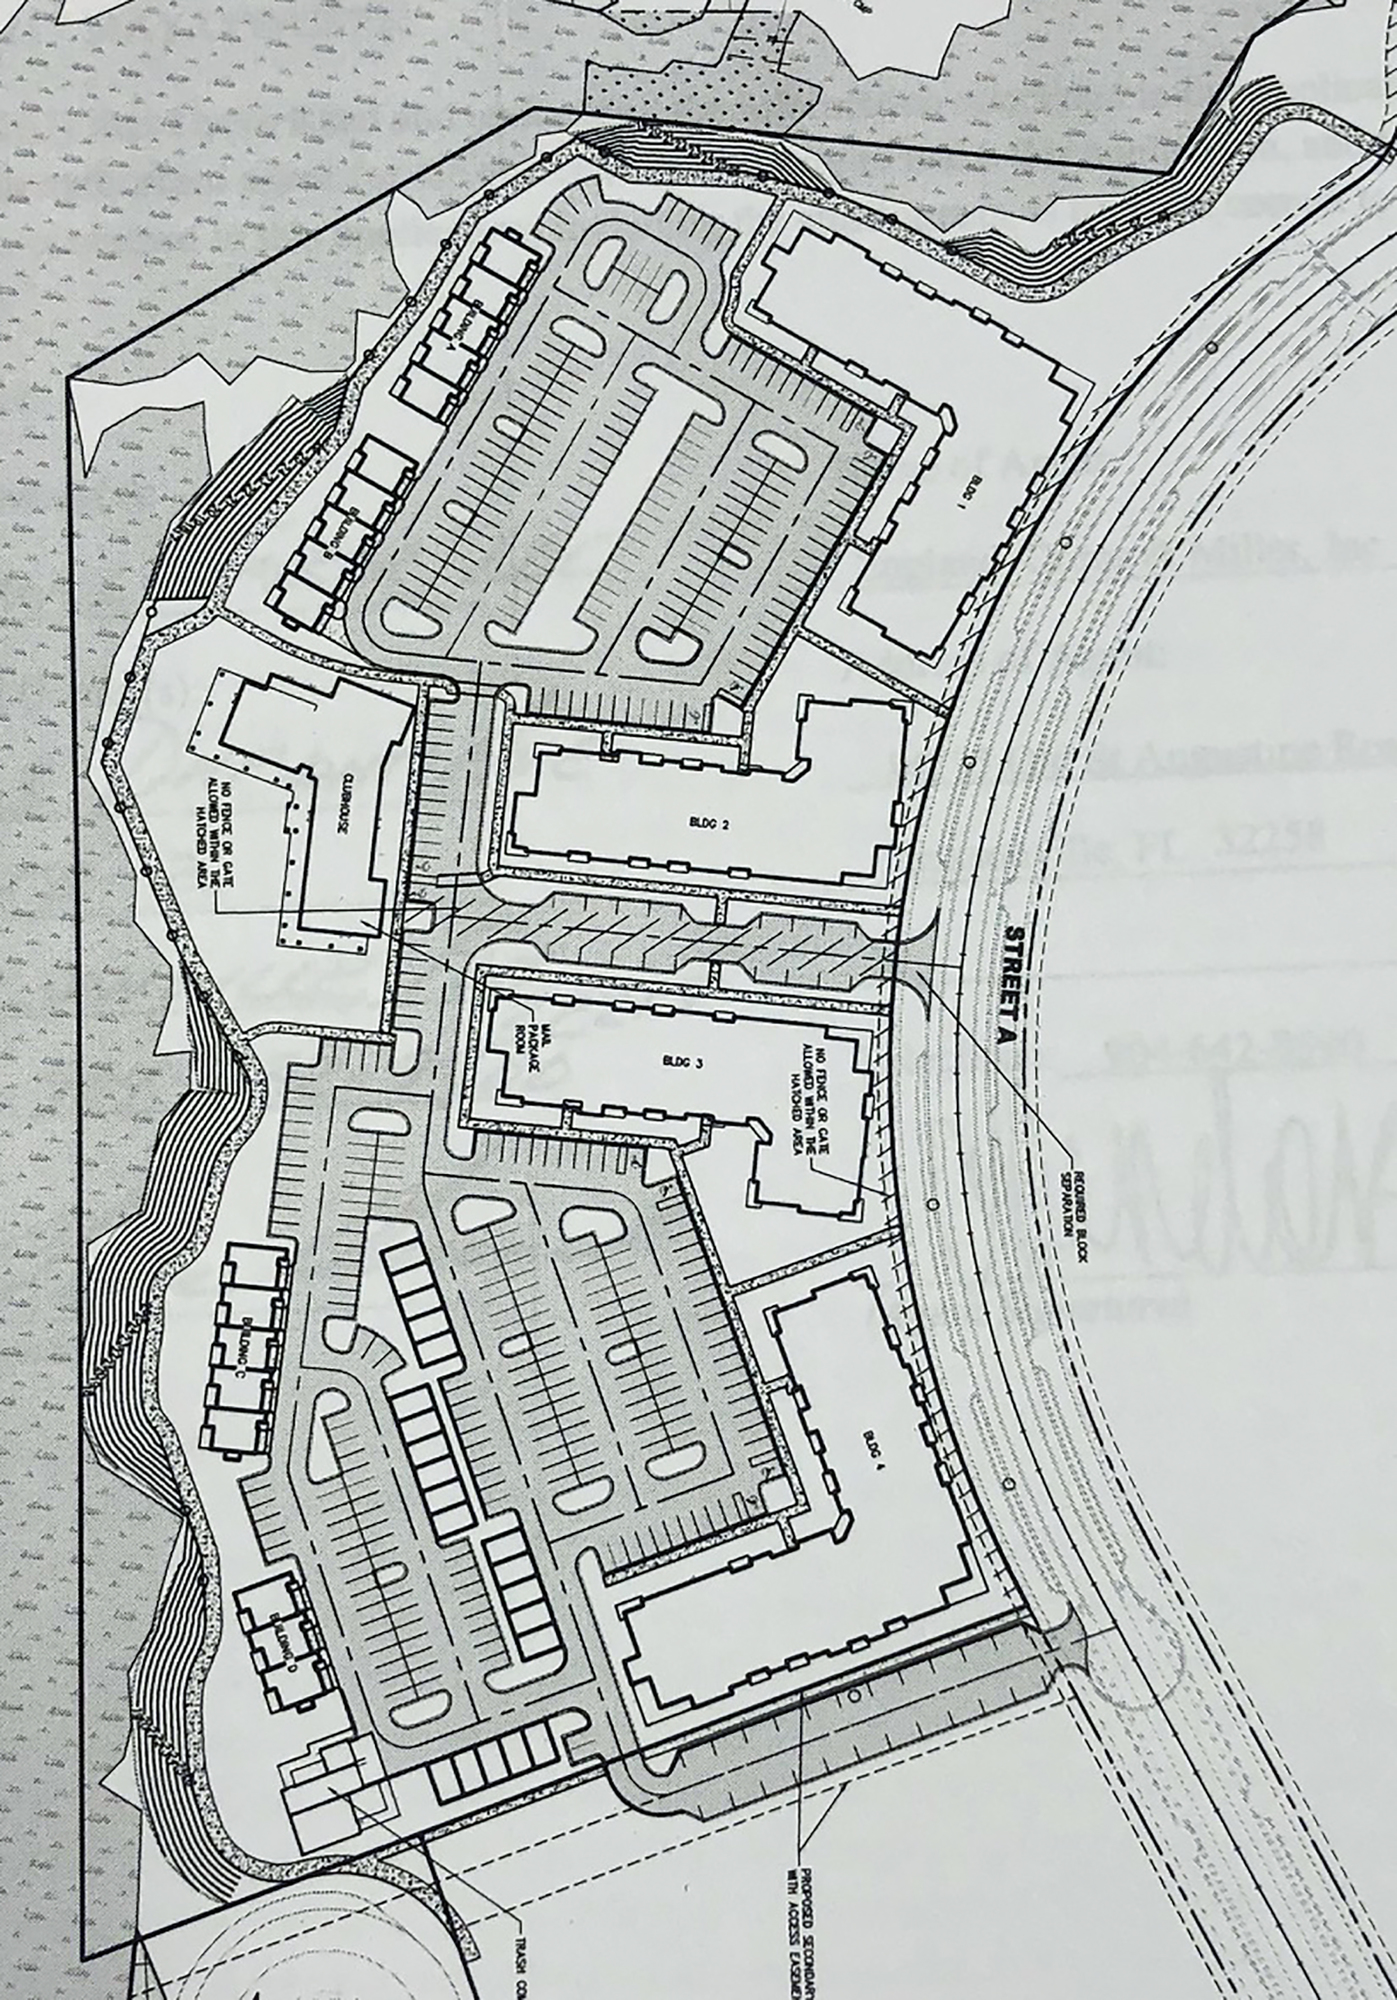 The site plan for the development.